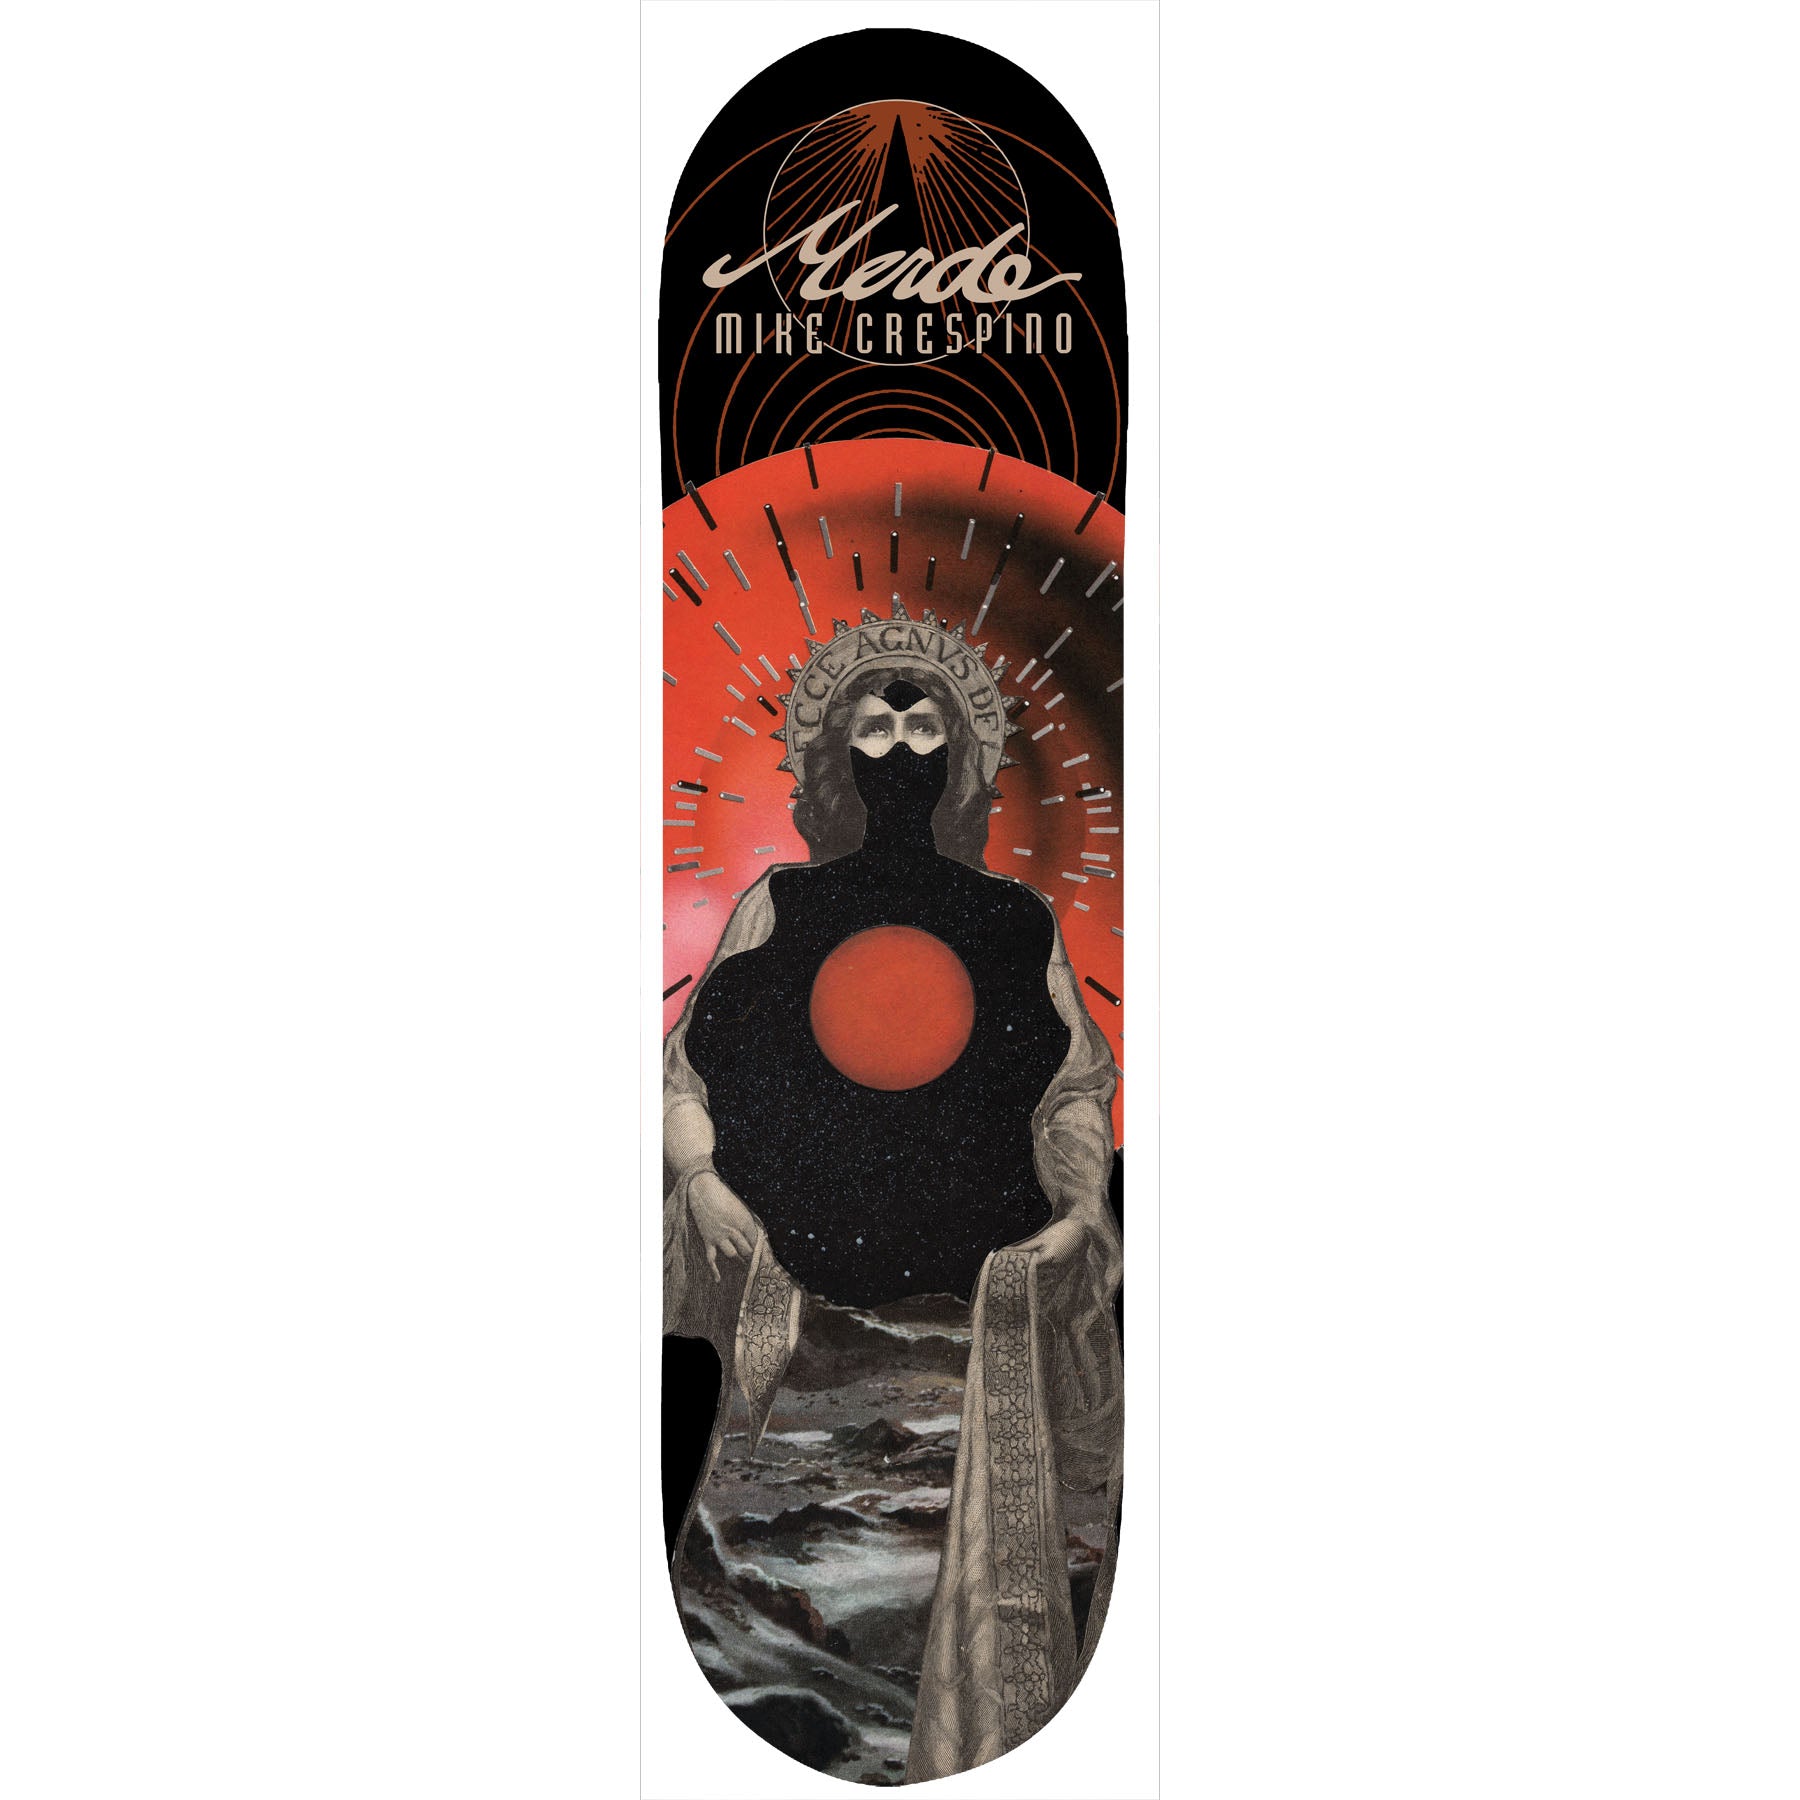 Merde Skateboards "Mike Crespino- Behold the Lamb of God- Ojerum" Assorted Sized Deck